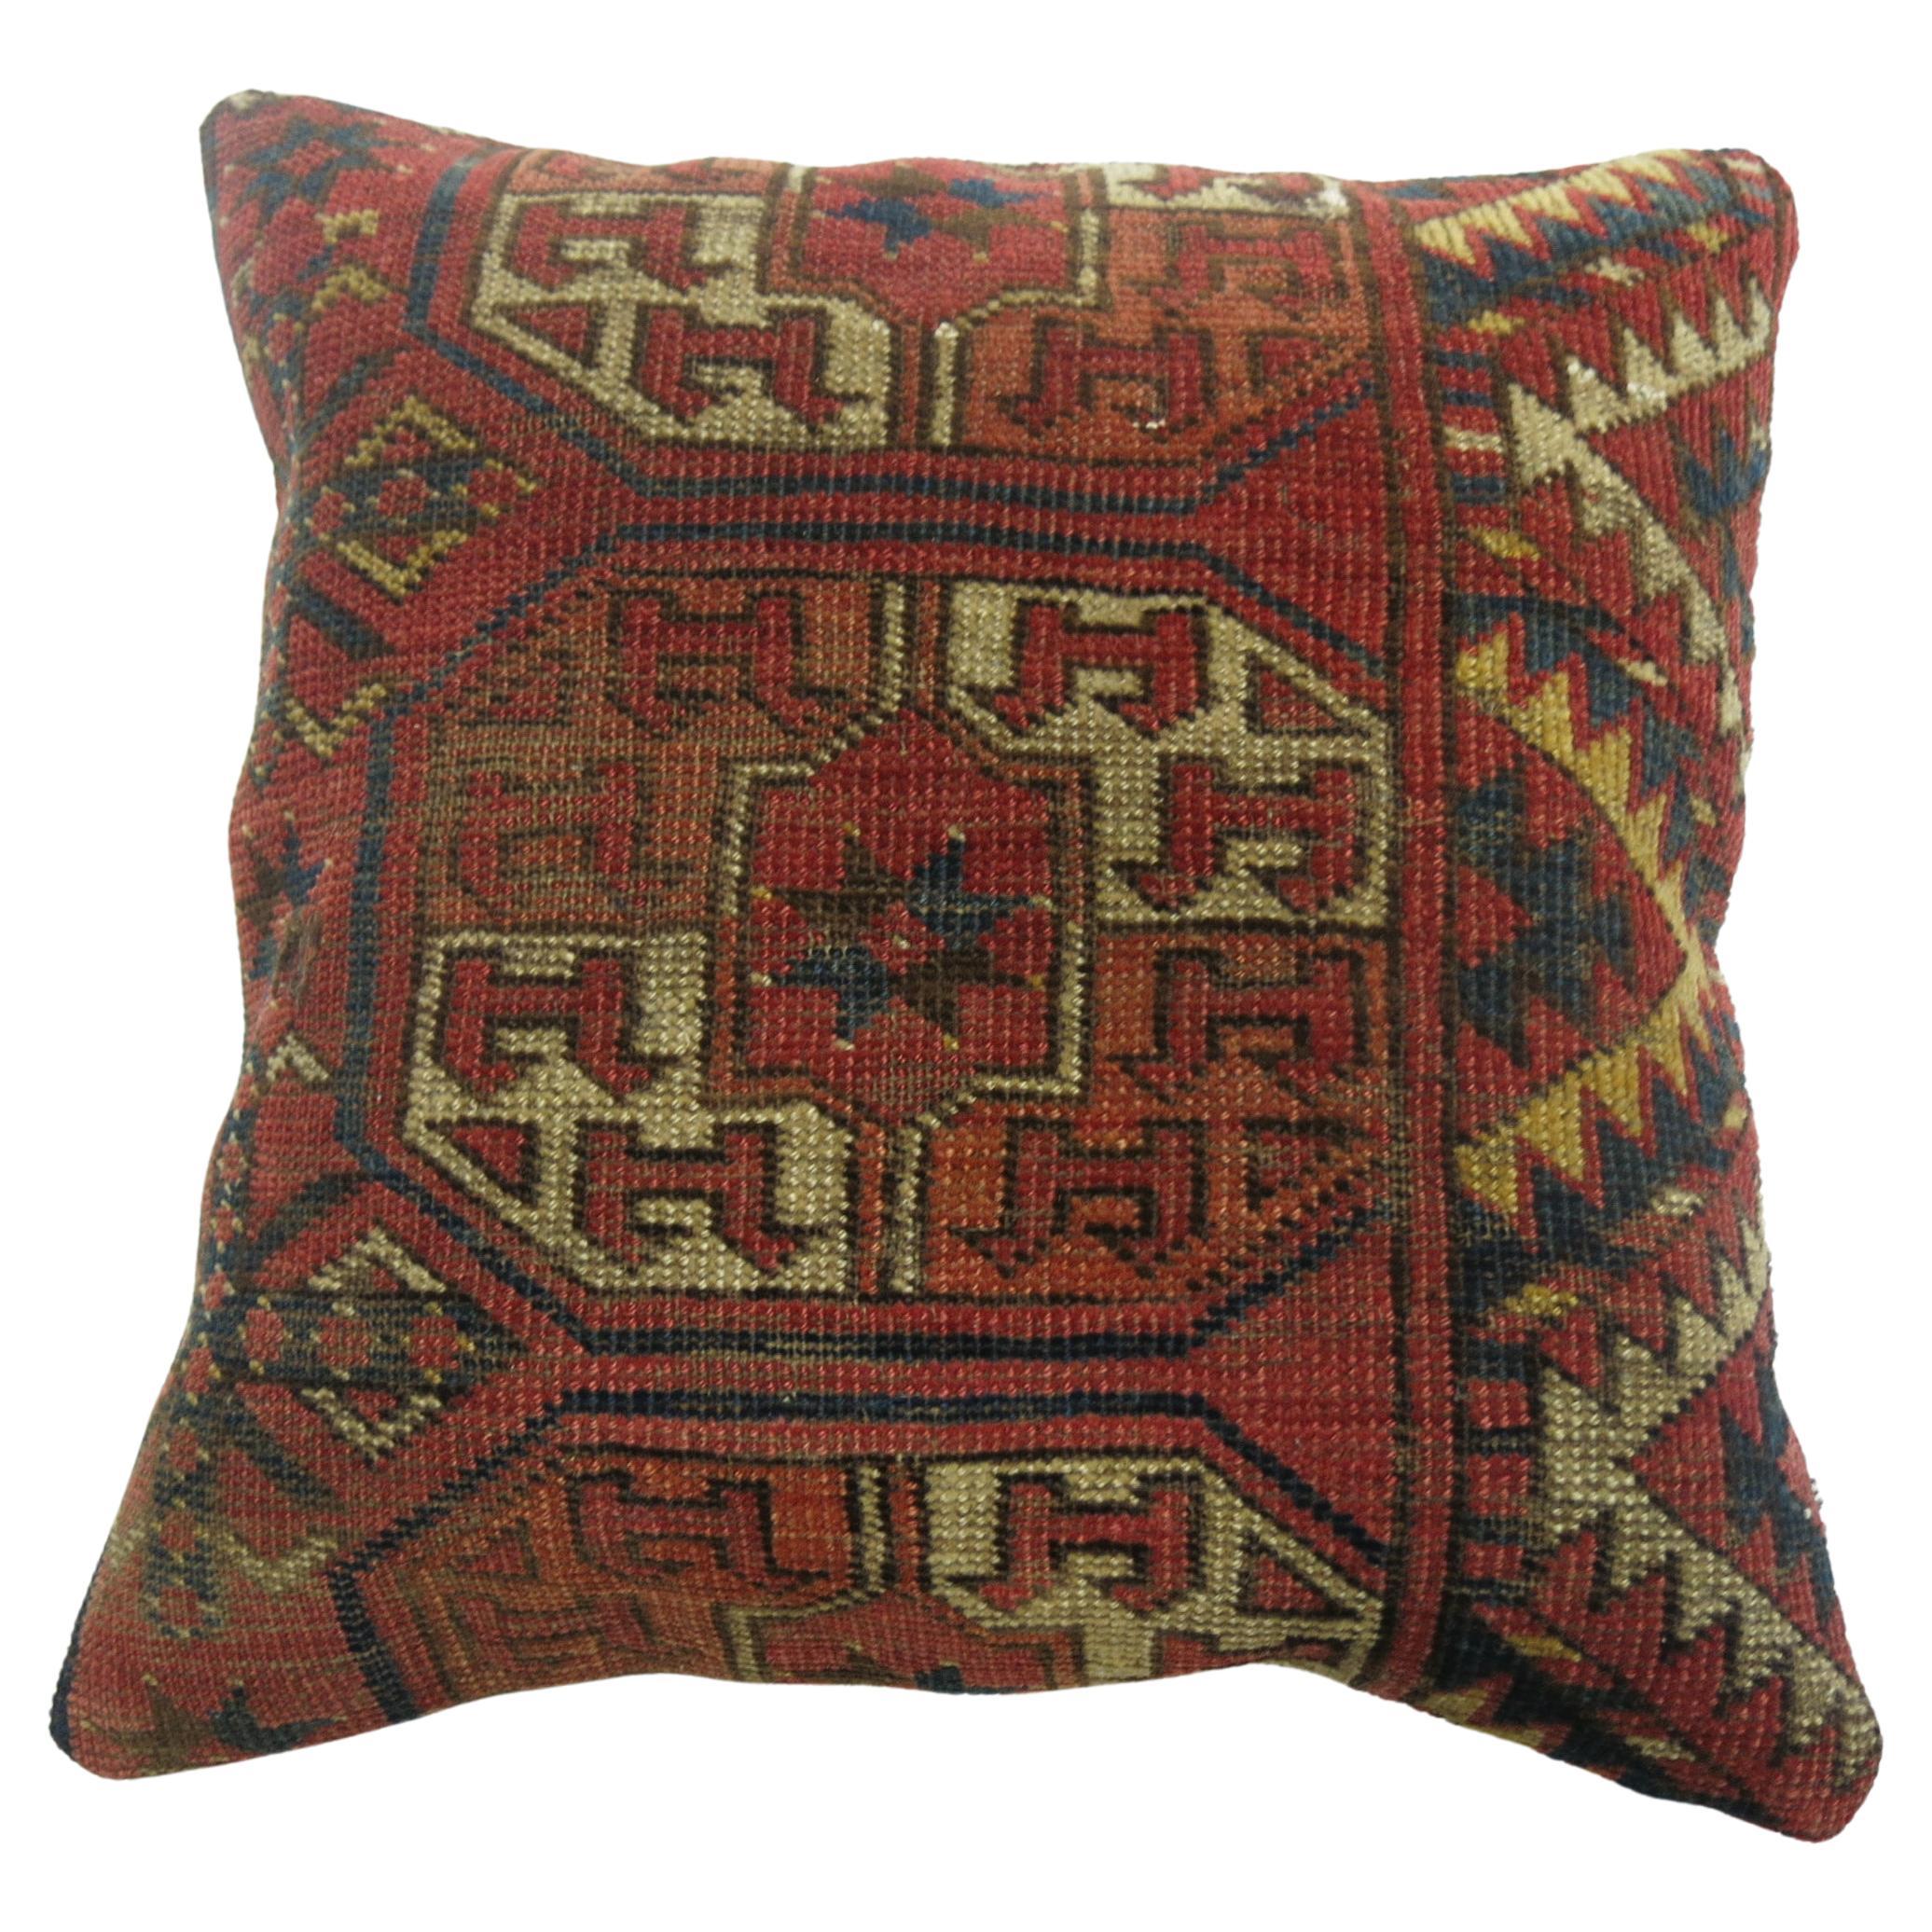 Pillow made from a 19th century afghan Turkeman rug.

Measures: 16'' x 16''.